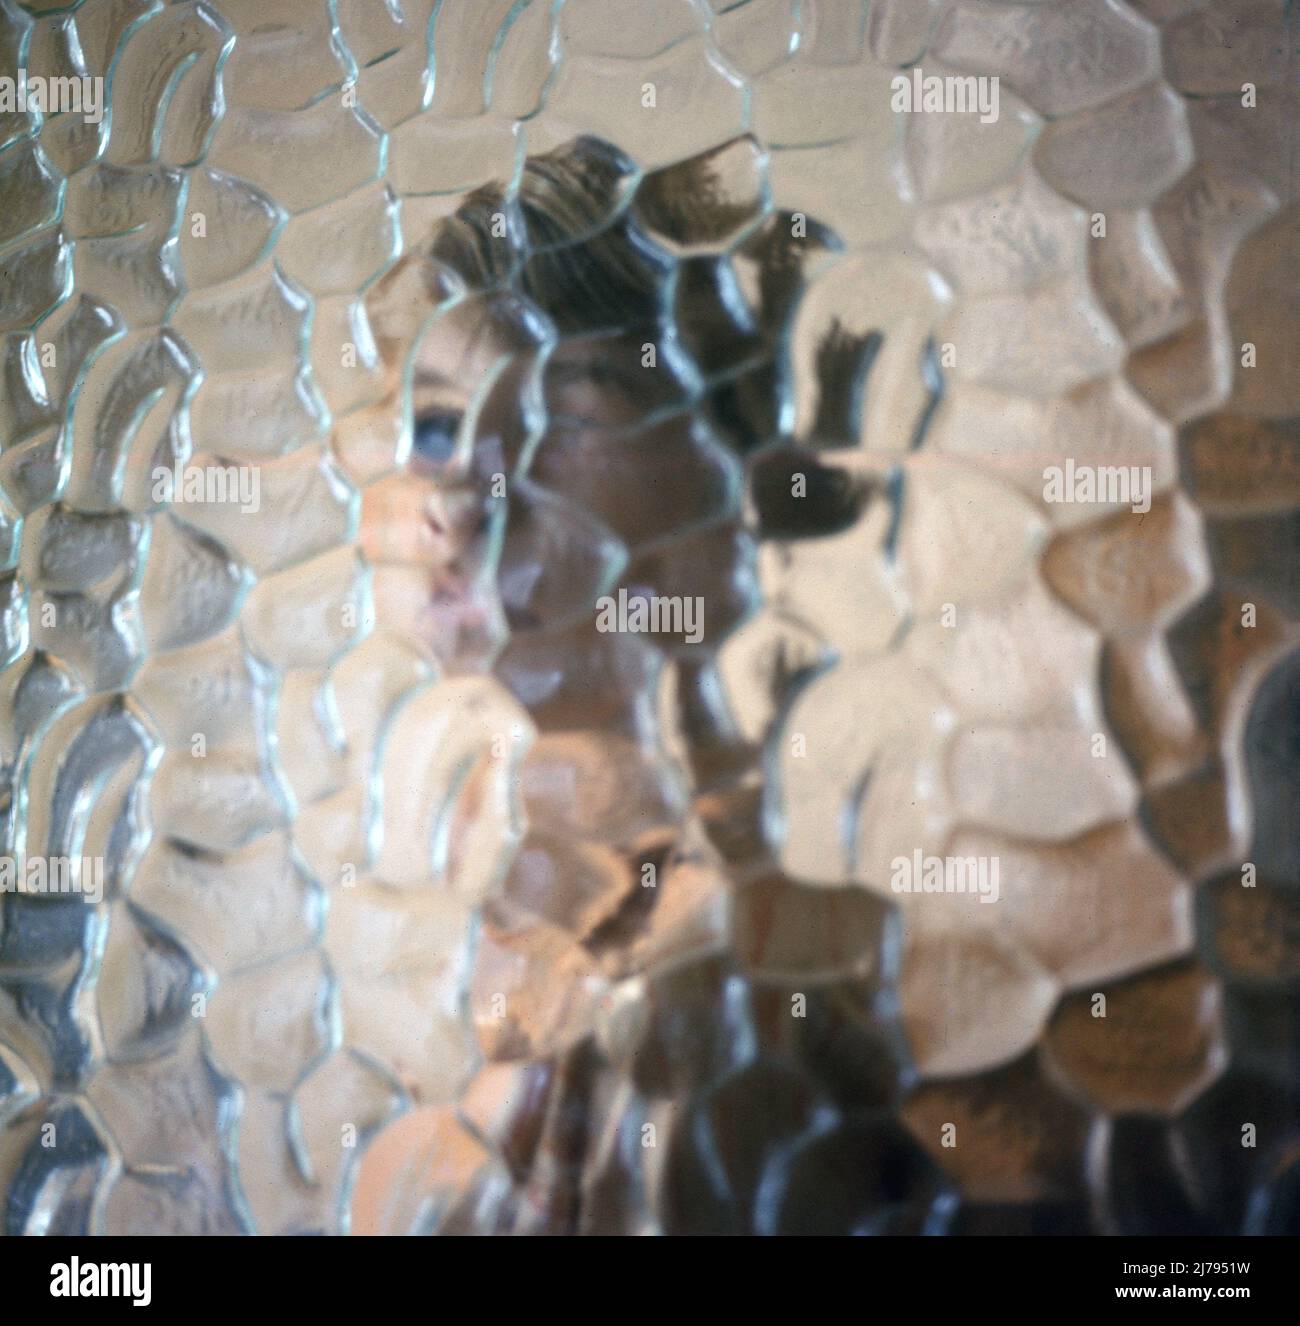 1970s, historical, the outline figure of a young woman behind a glazed, honeycomb patterned or textured glass window. This type of glass is known as figured or patterned rolled glass and was a popular style of glass used in the home in this era. Stock Photo